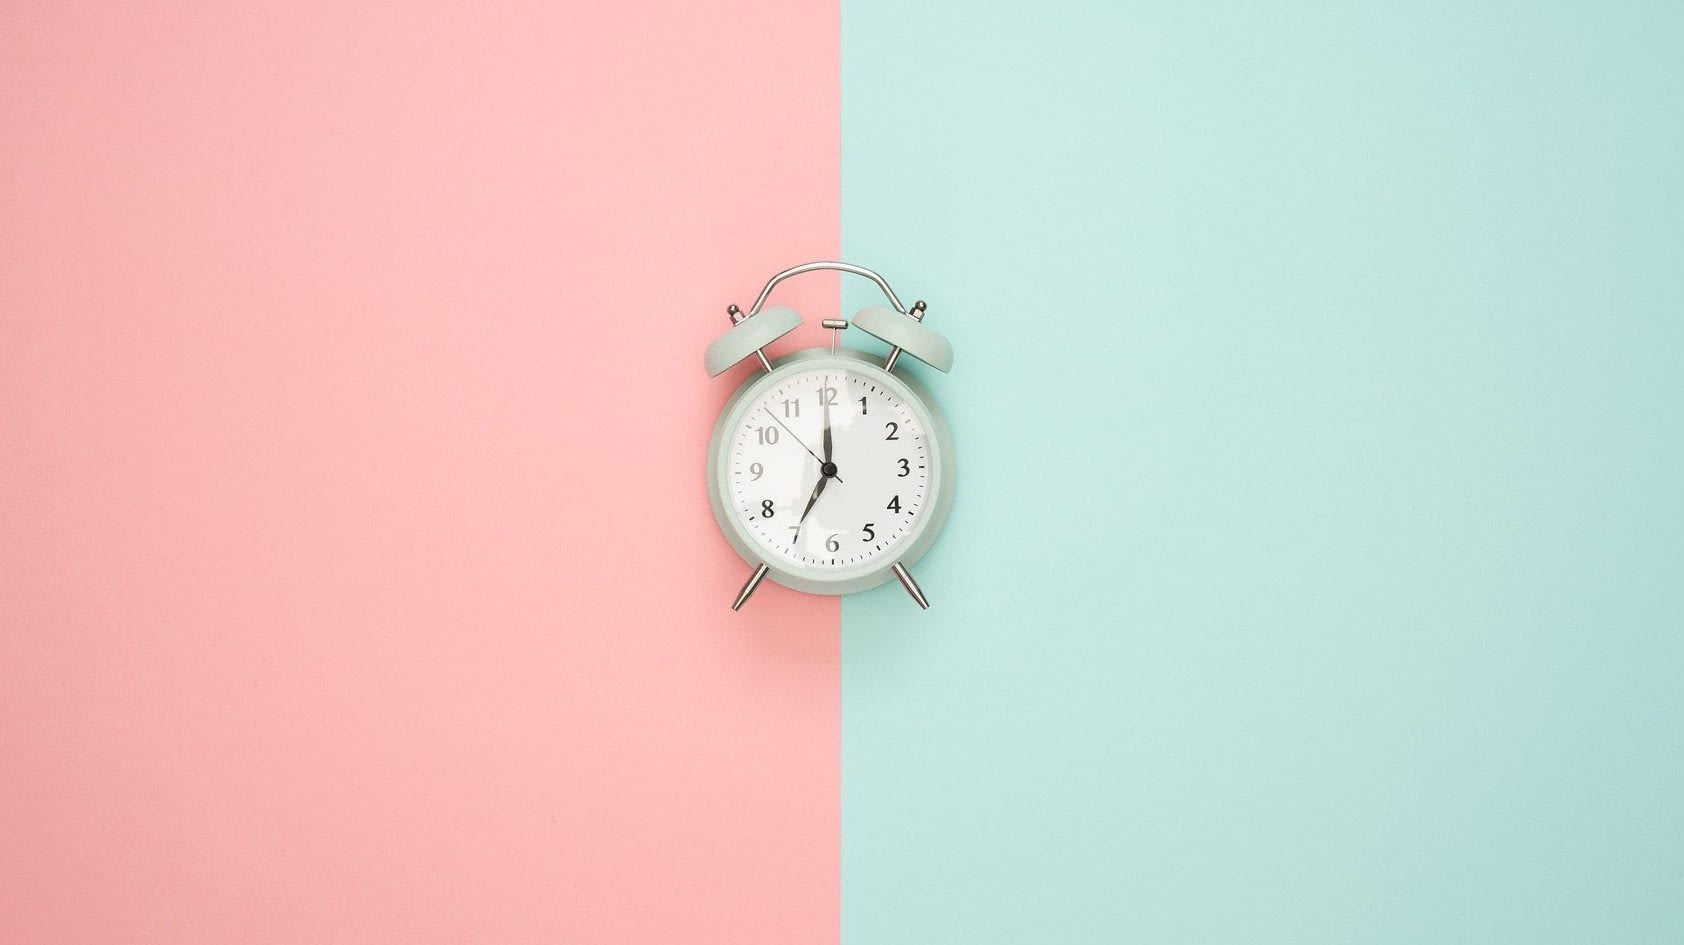 Image: Alarm clock on a background with two different colors splitting the image down the middle representing two ways of seeing time